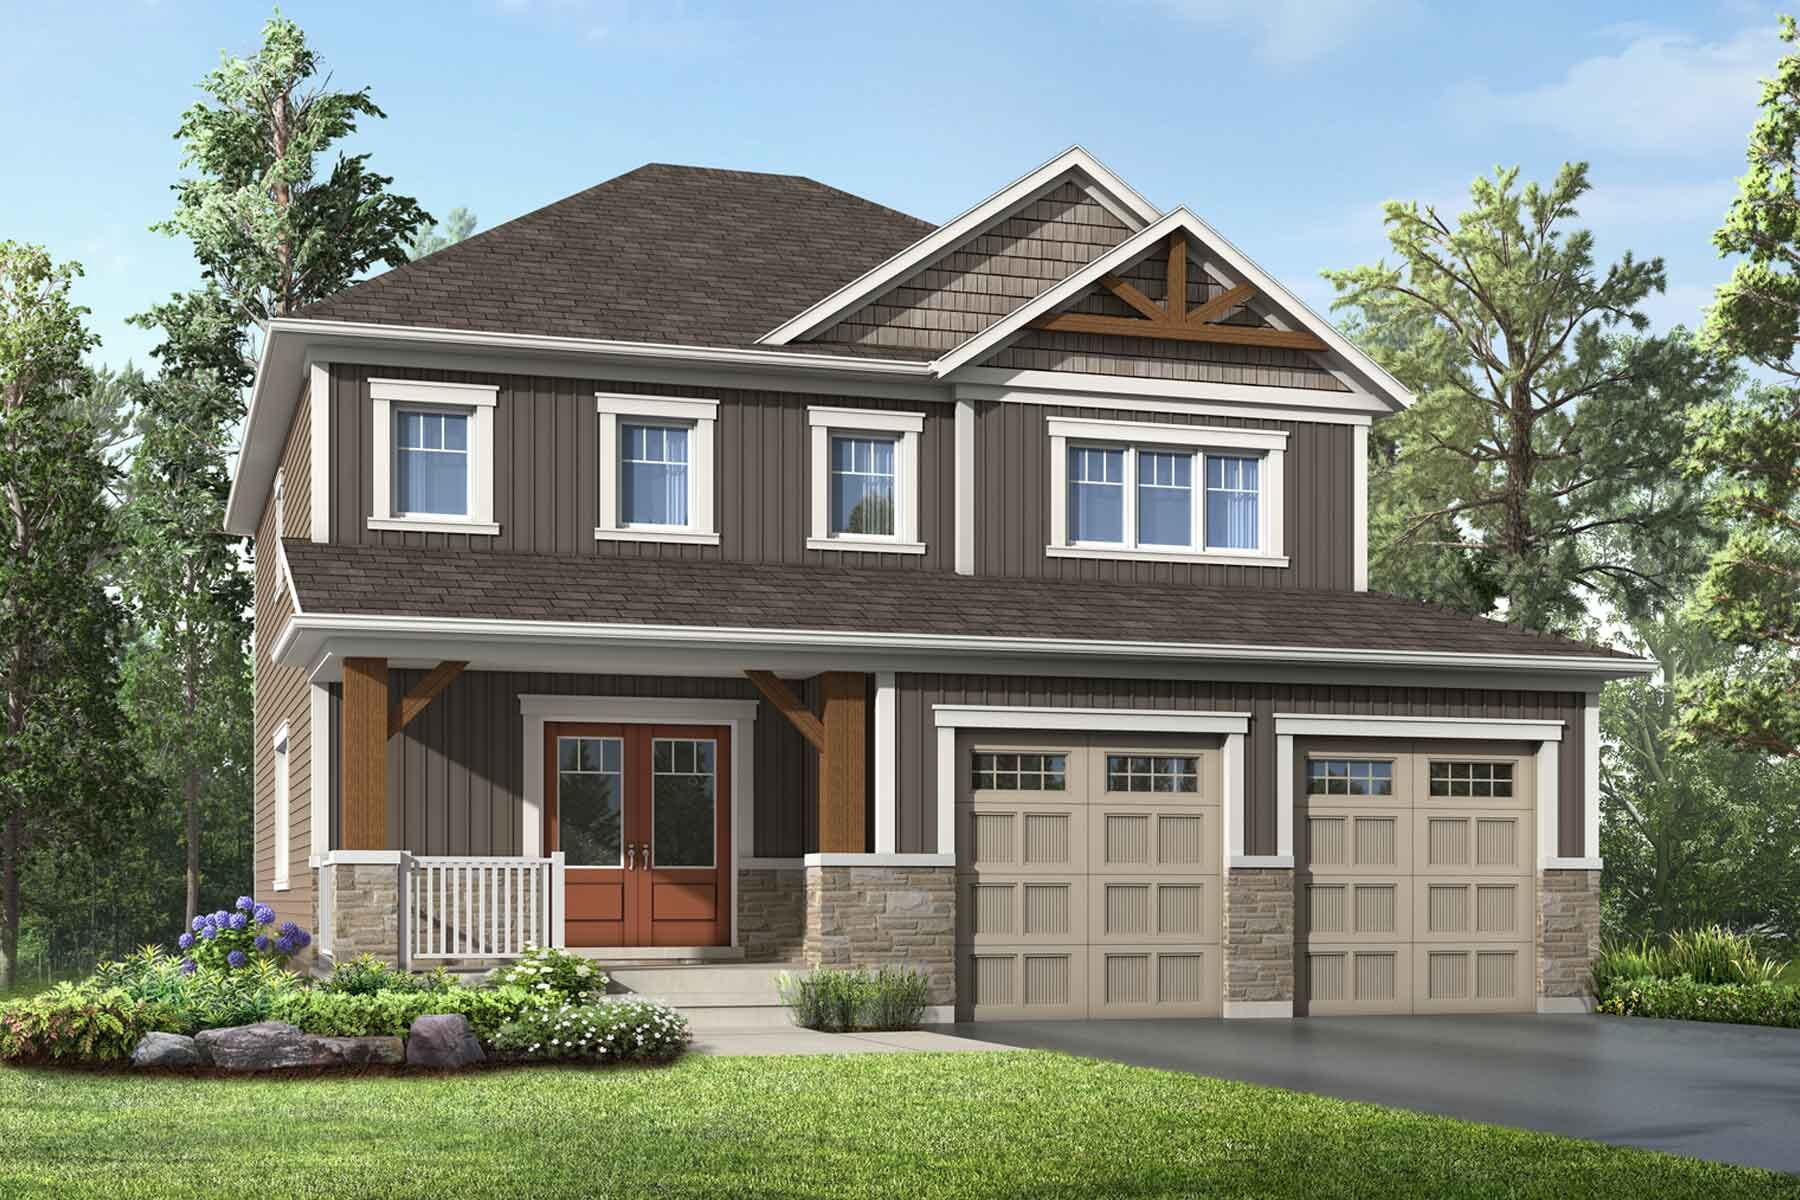 A Muskoka style elevation with double car garage, covered entrance and brown siding with a red door. 